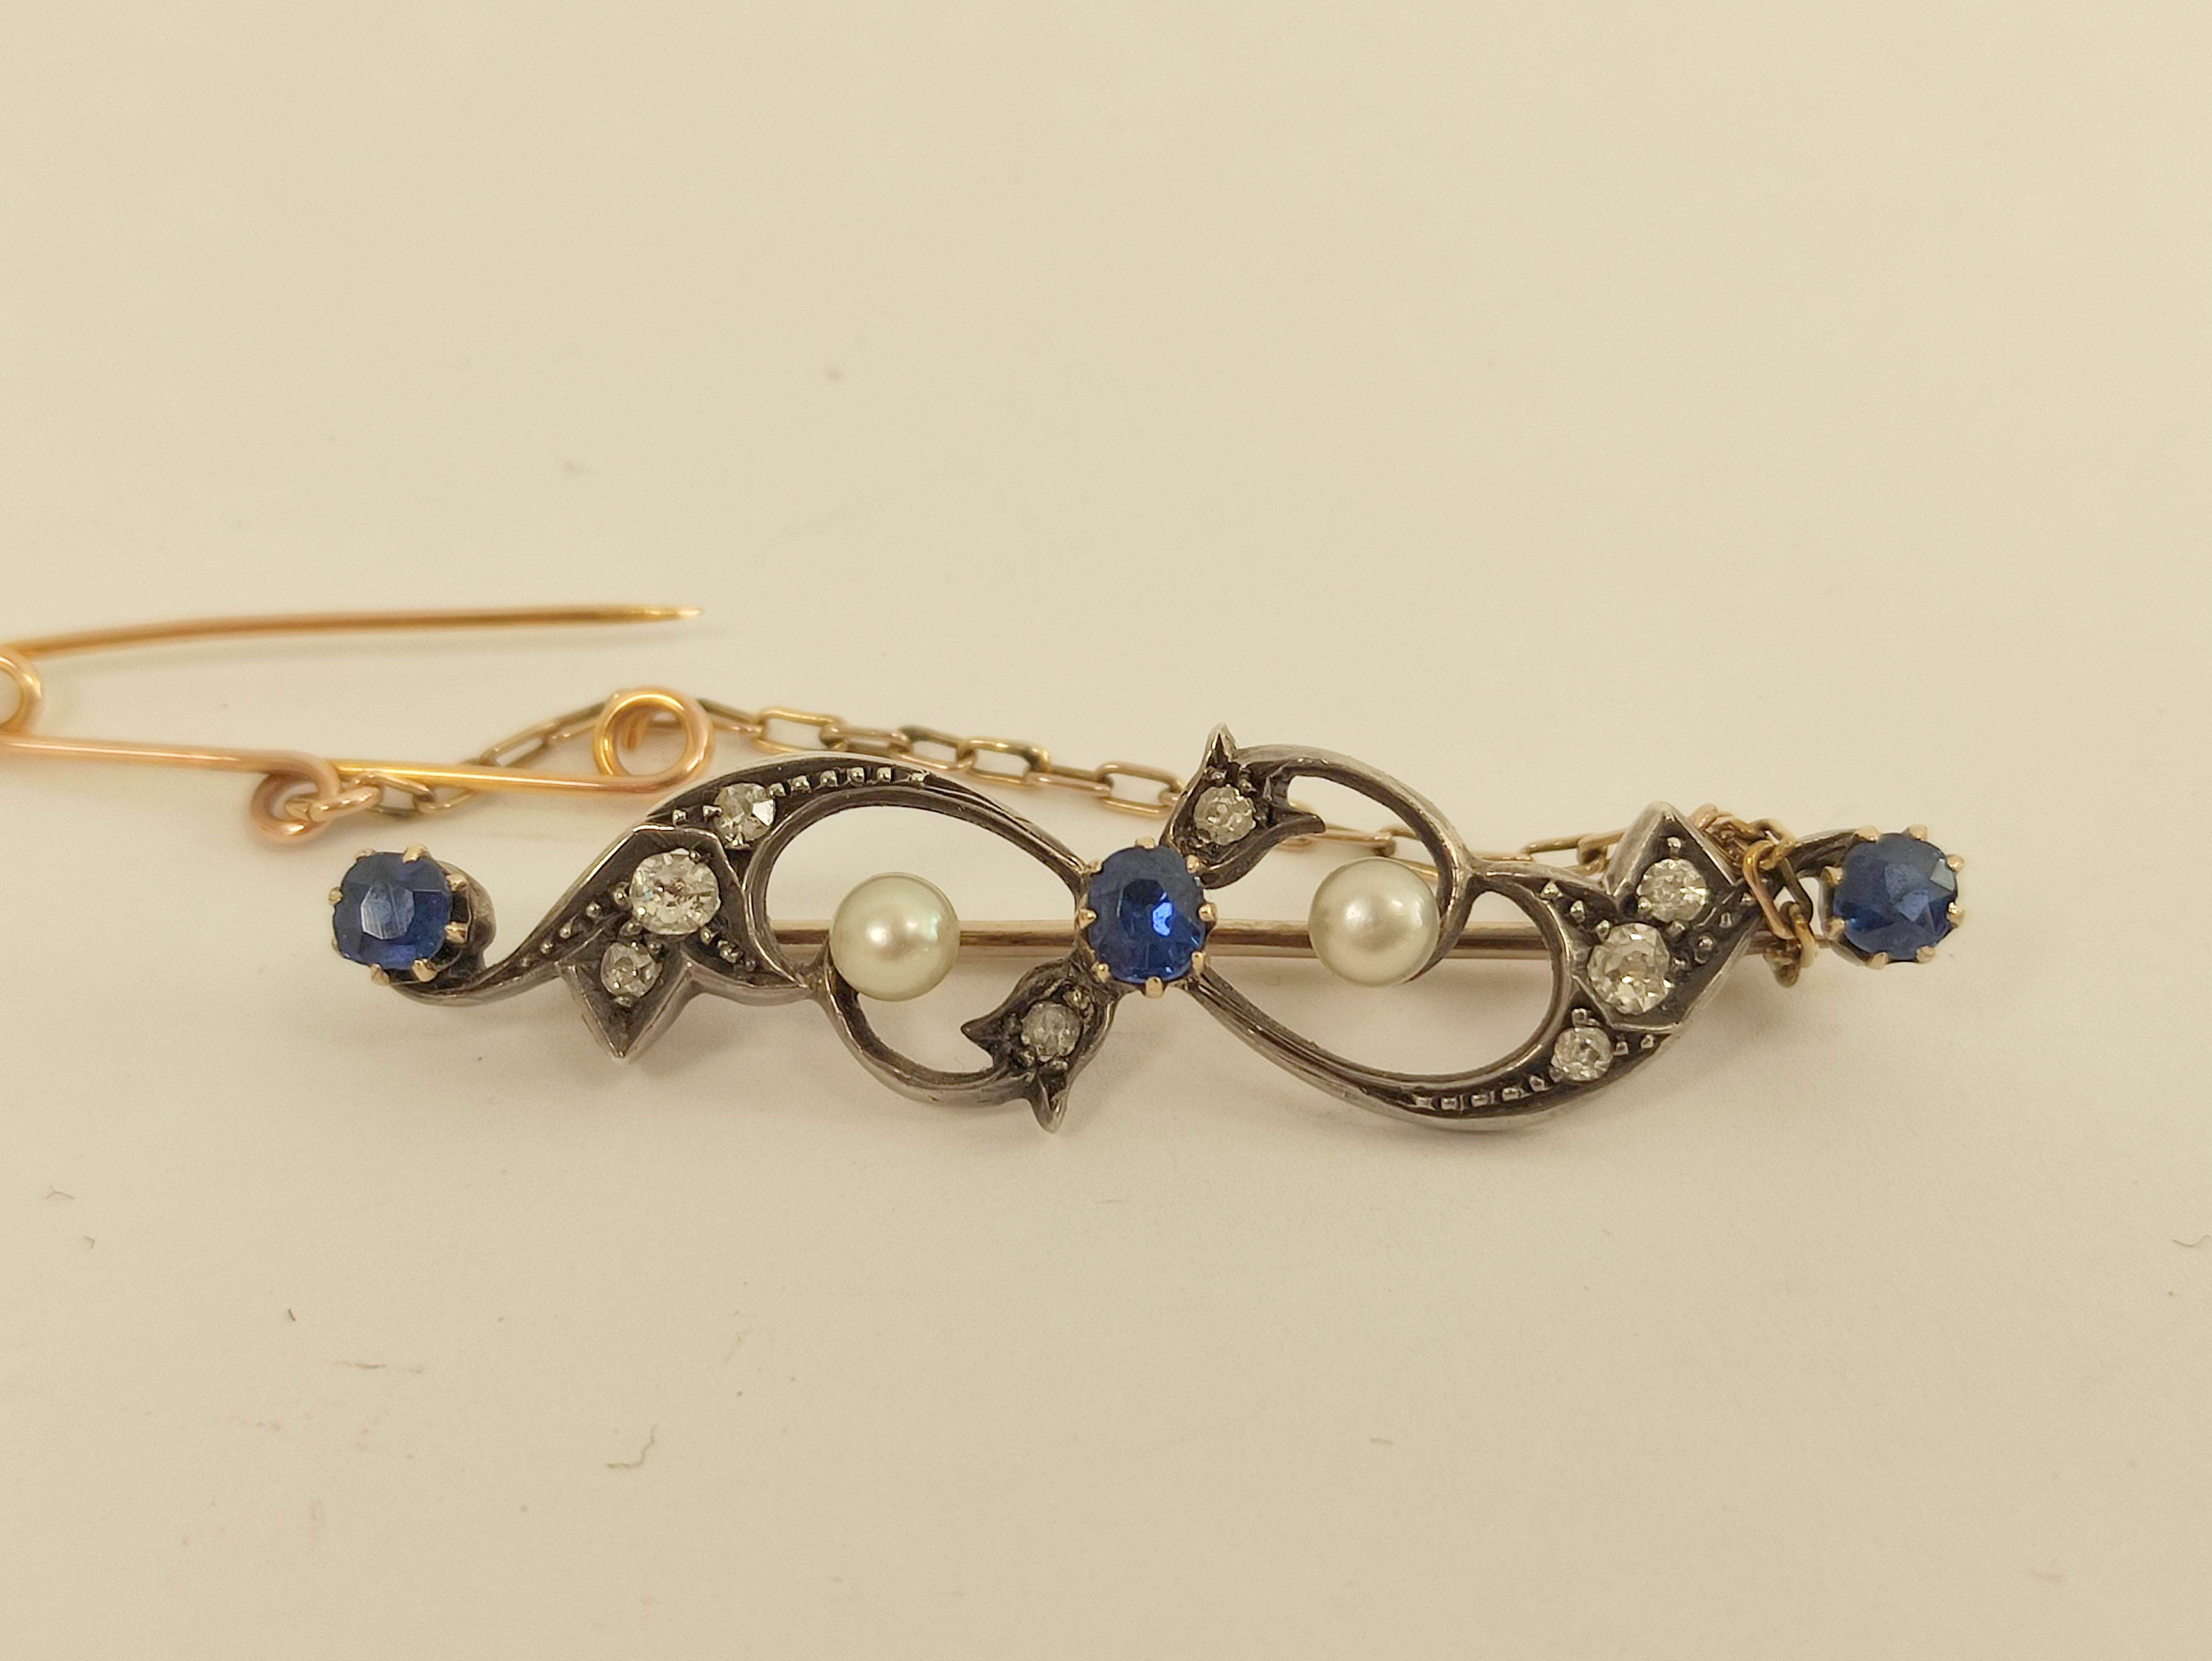 Edwardian gold brooch with scrolls of three sapphires and diamonds in gold and silver. - Image 6 of 6